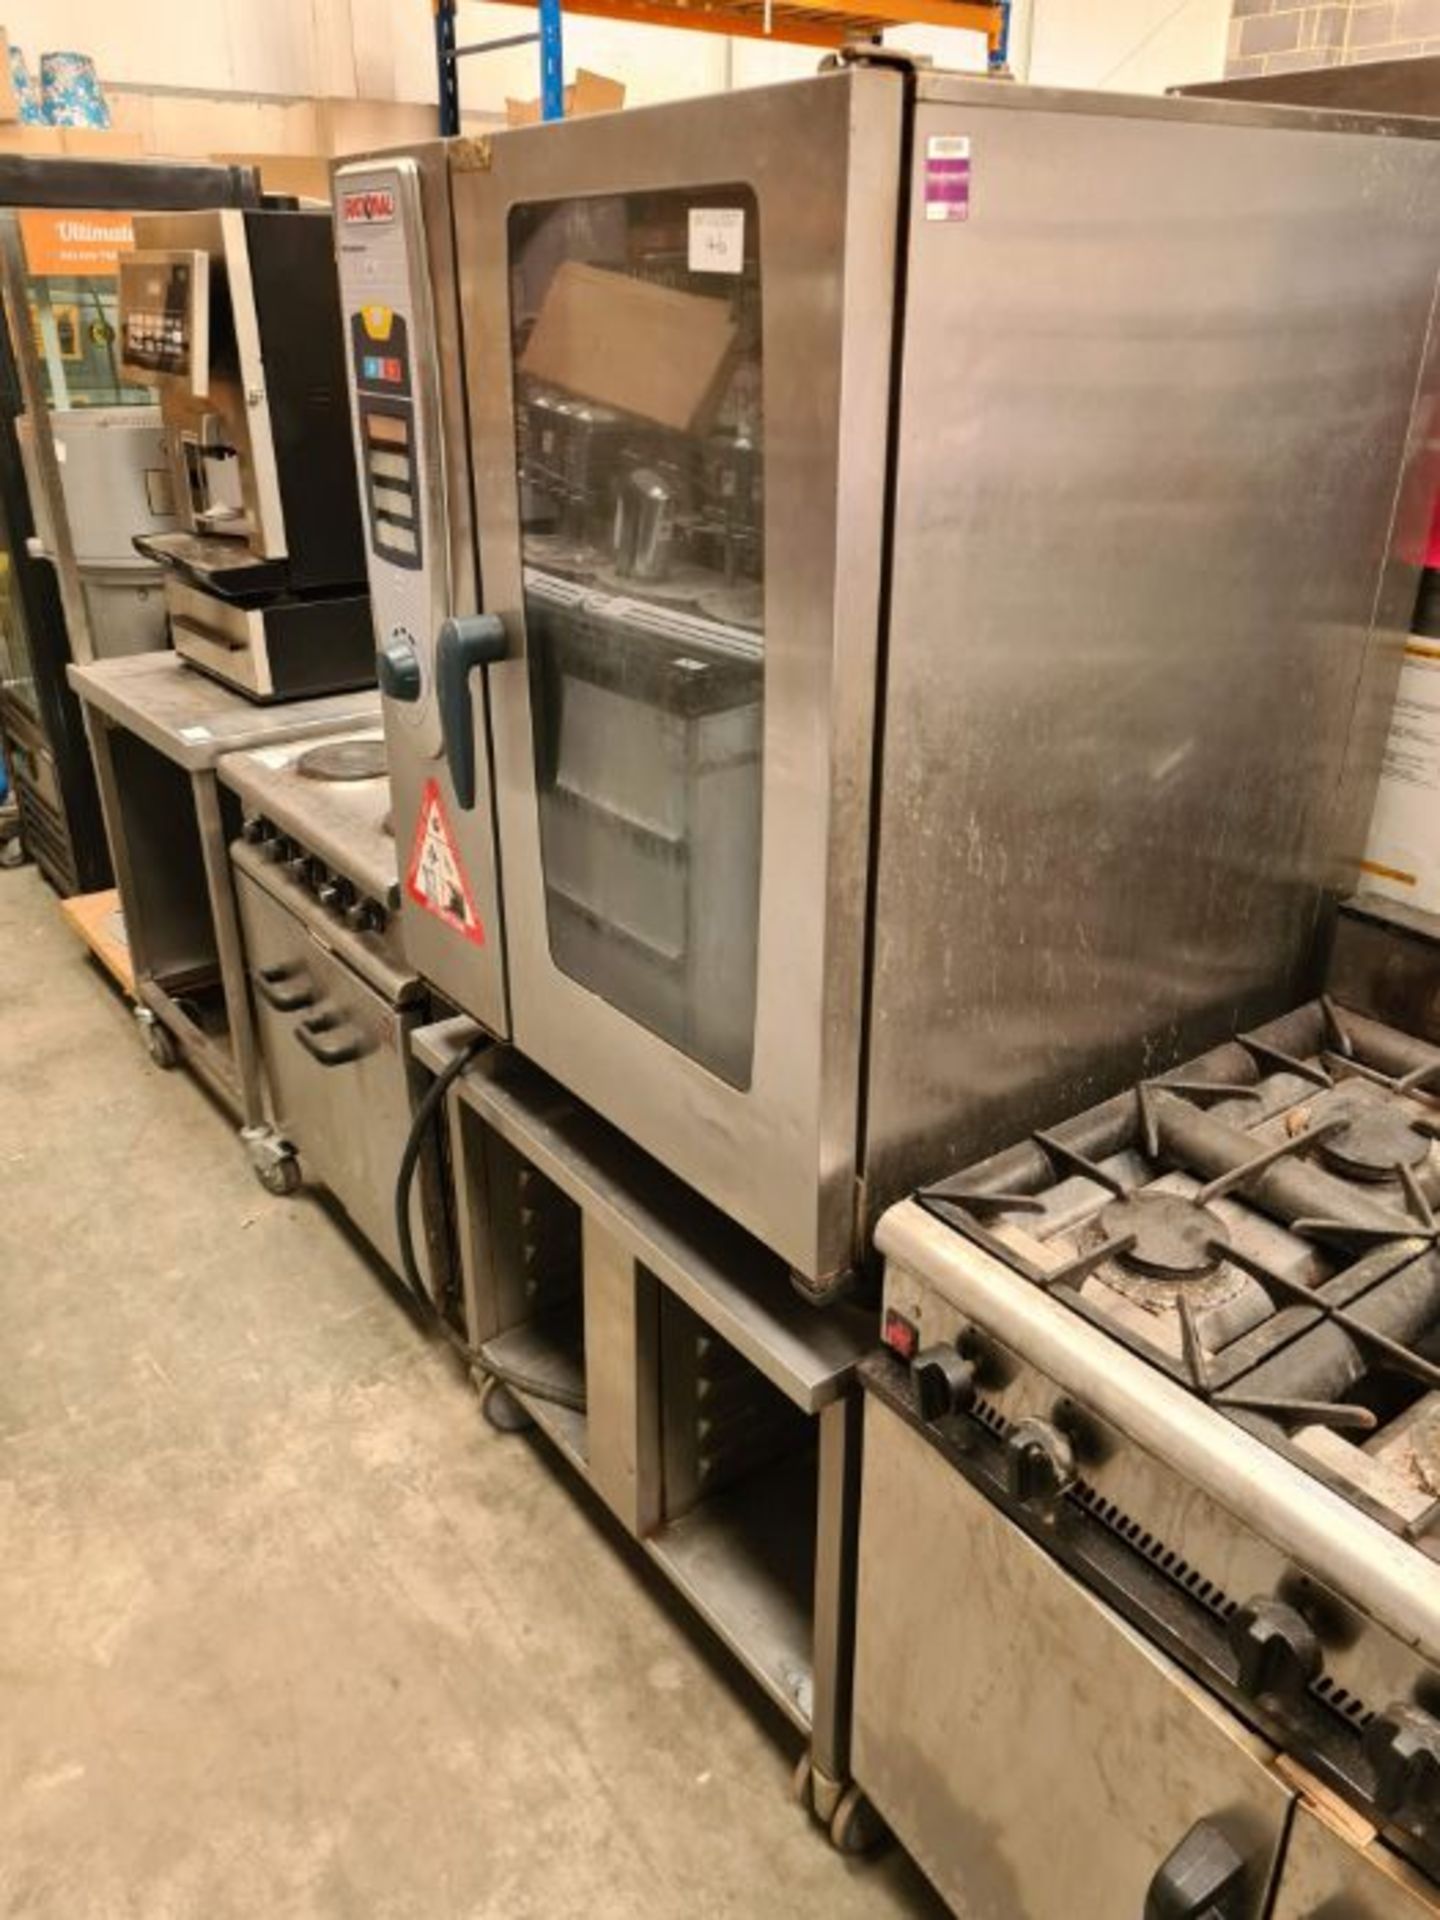 Rational self cooking center, 10 grid electric. - Image 2 of 6